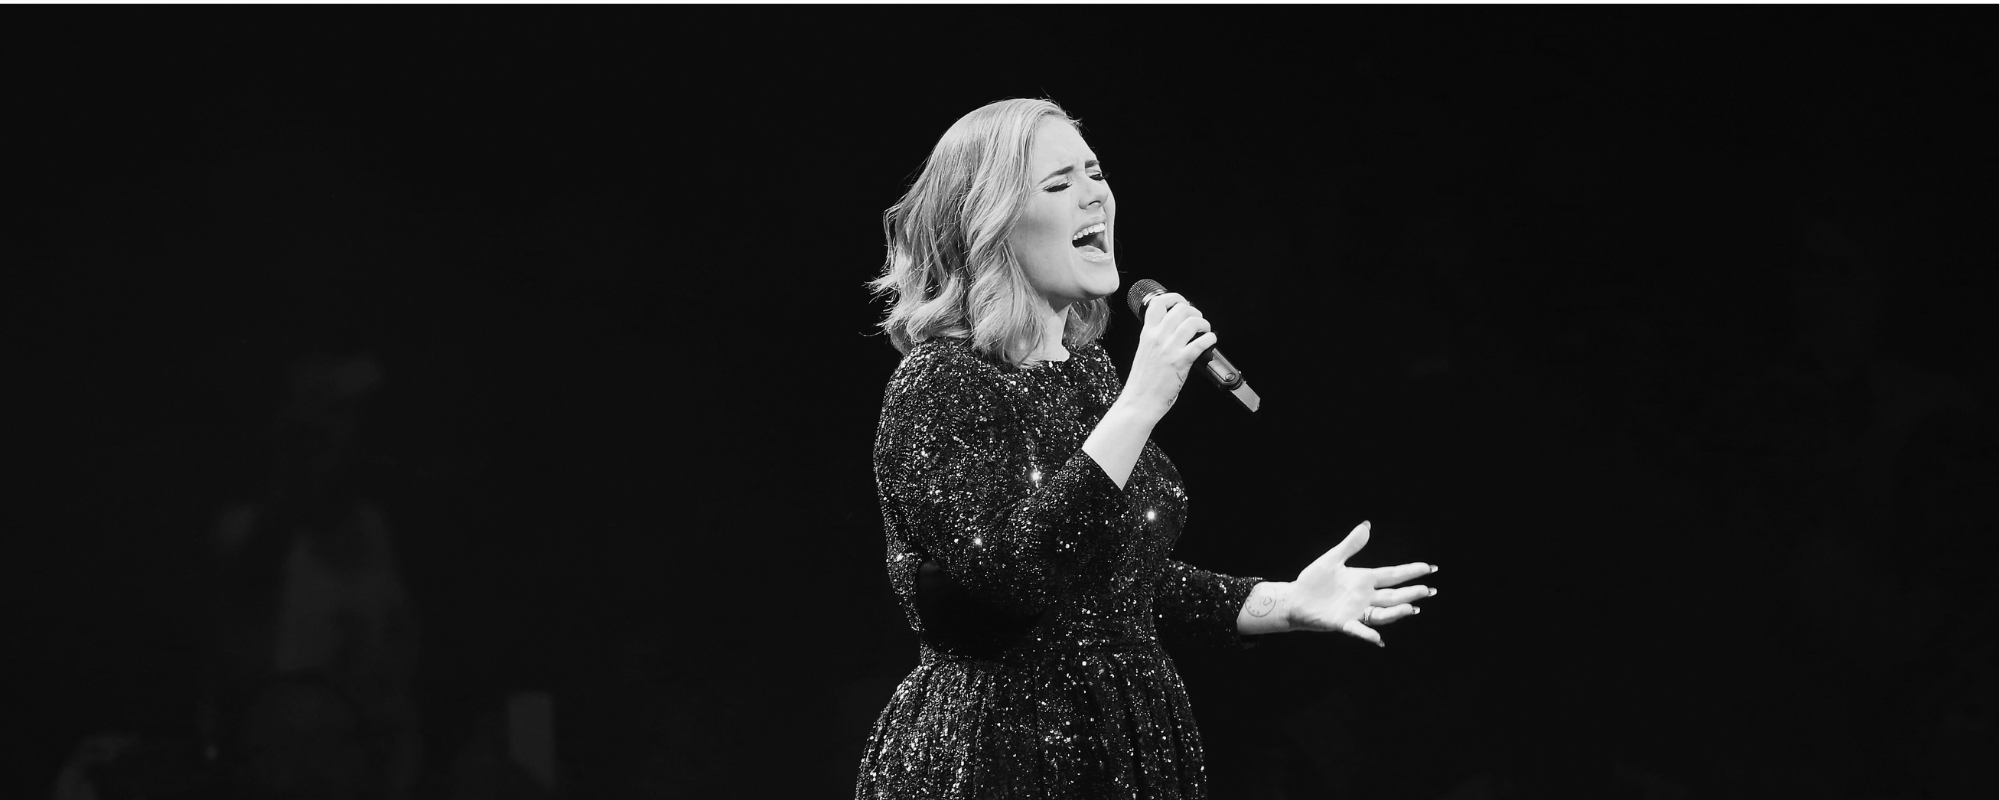 Watch: Adele Pays Tribute to Late ‘Friends’ Star Matthew Perry: “He Played One of the Best Comedic Characters of All Time”